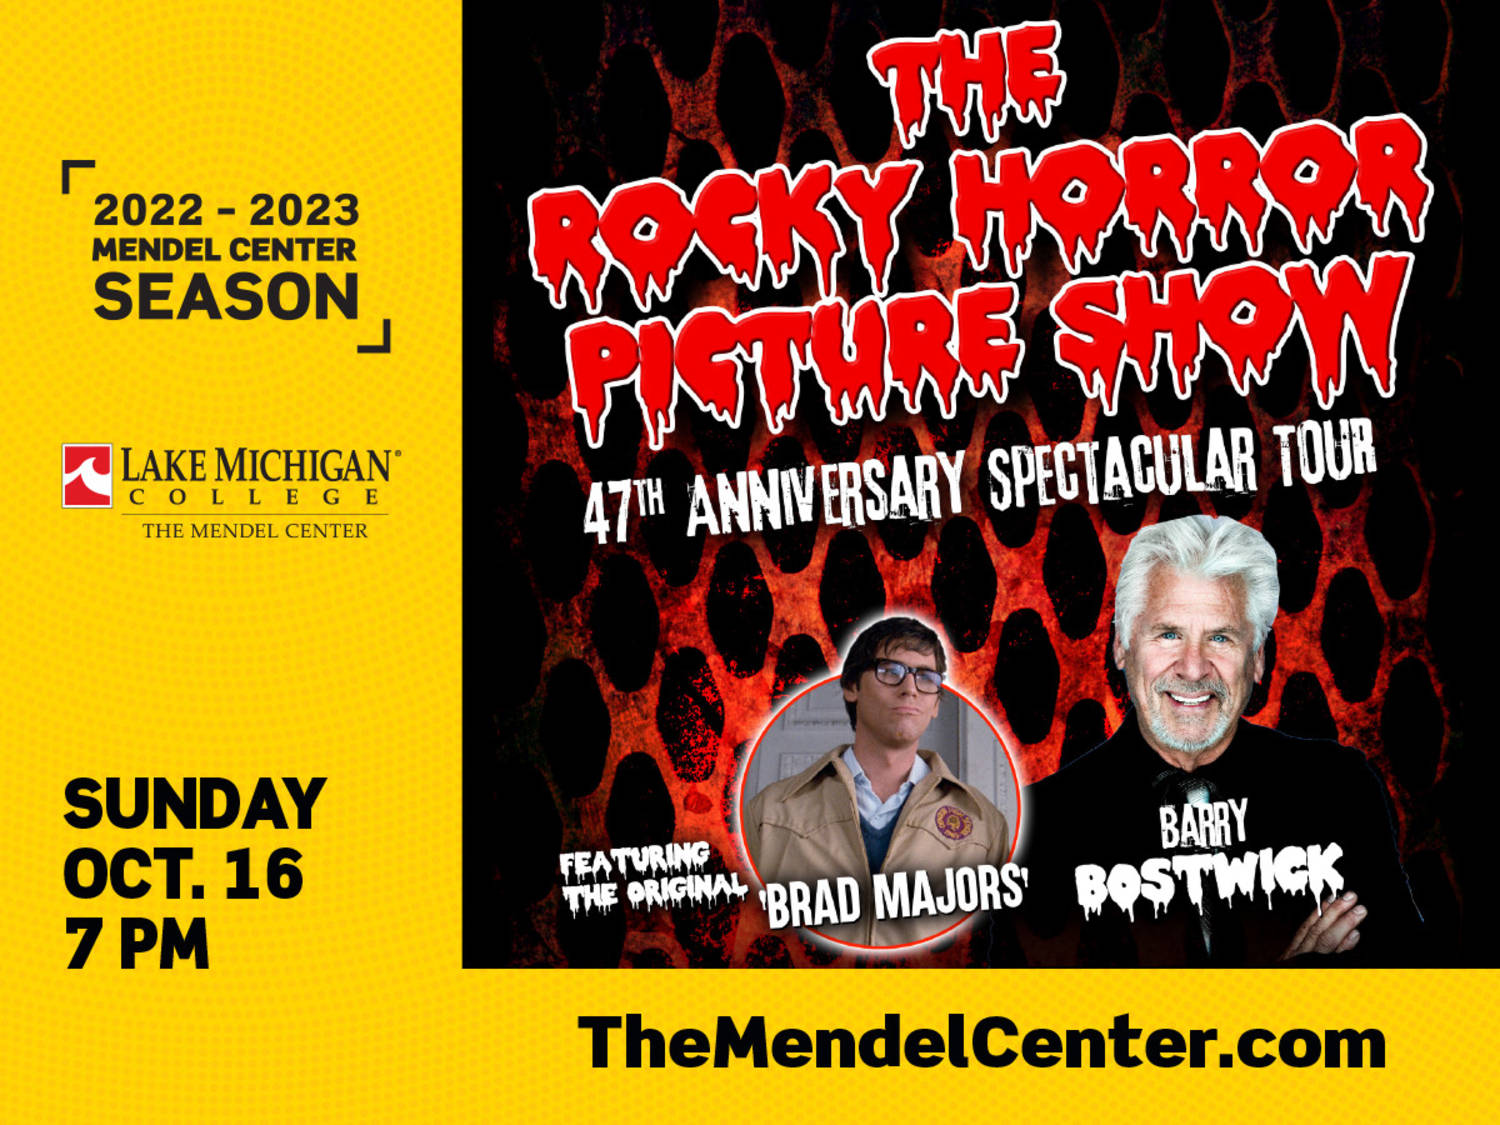 The Rocky Horror Picture Show 47th Anniversary Spectacular Tour comes to The Mendel Center at Lake Michigan College in October